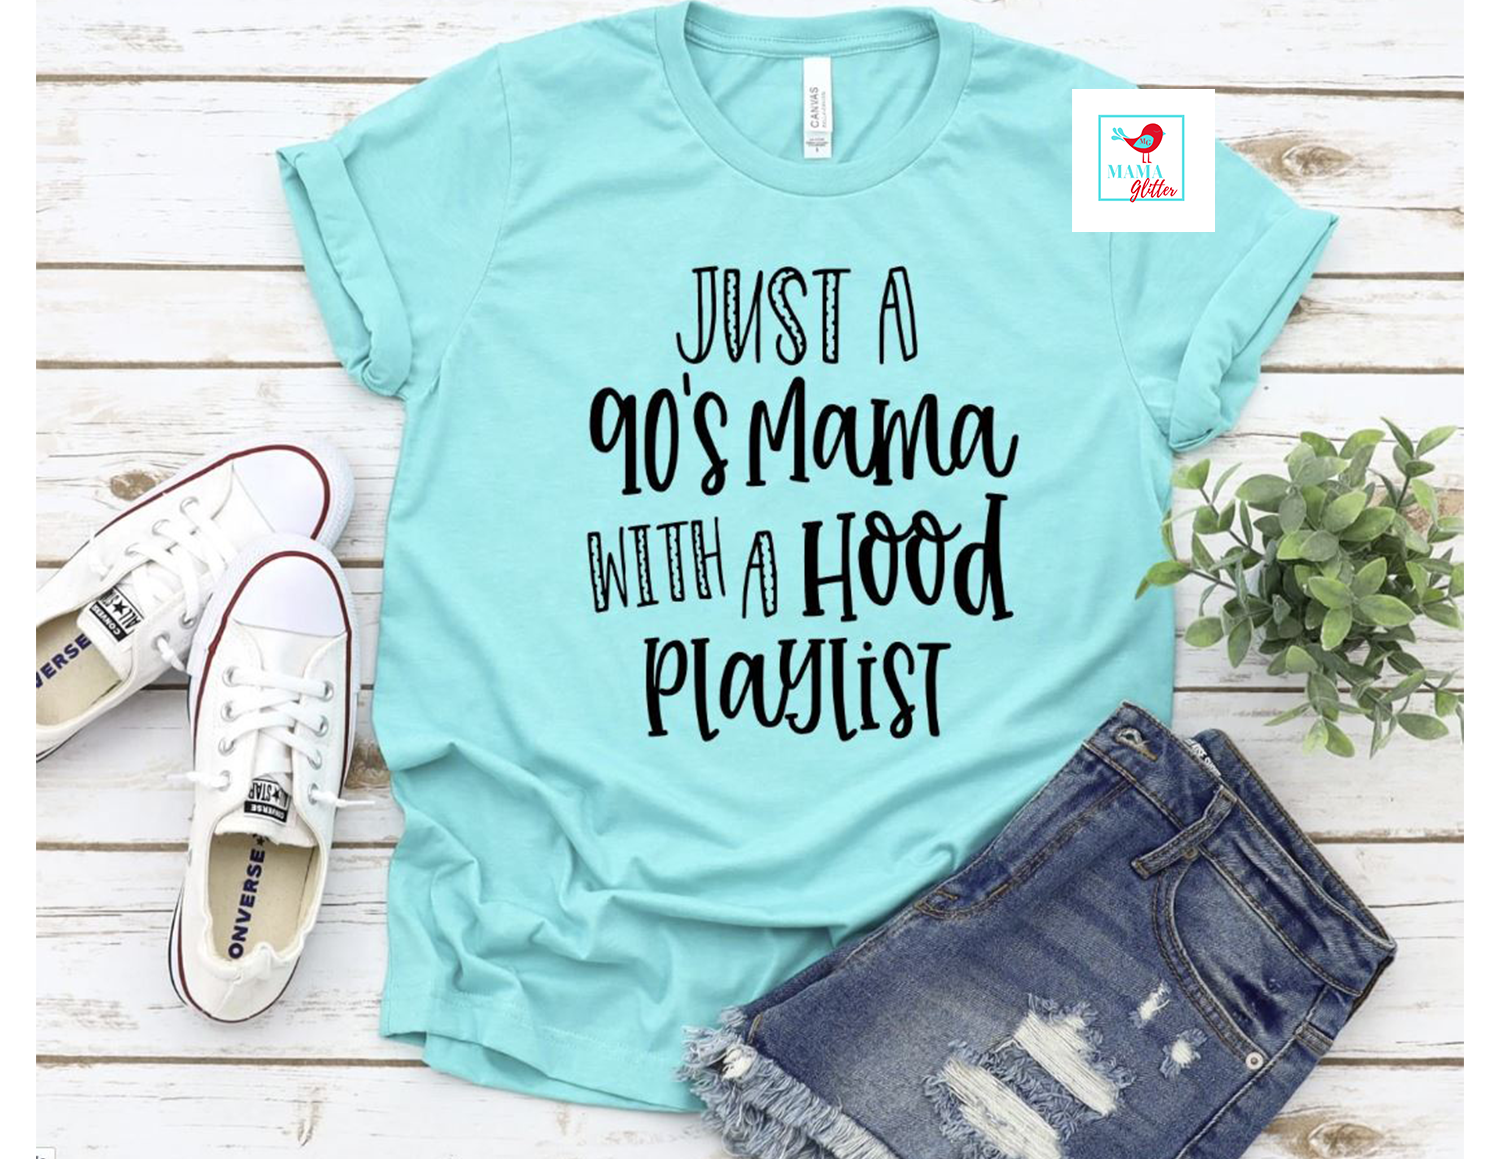 Just a 90's Mama With a Hood Playlist